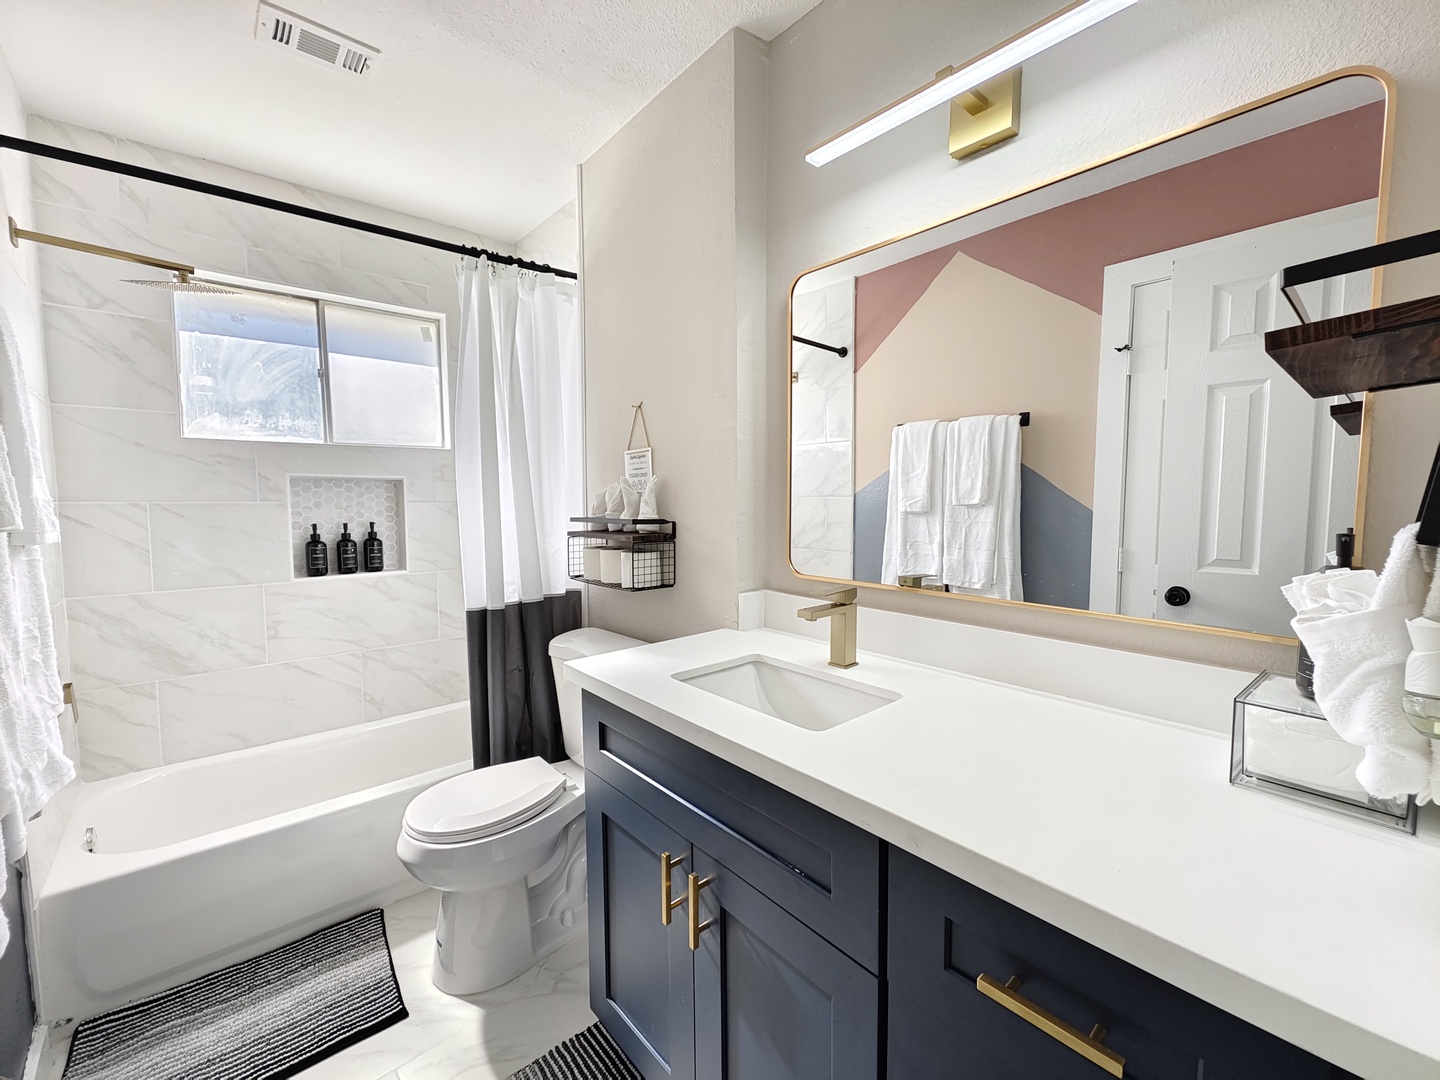 This full bathroom offers a large single vanity & shower/tub combo